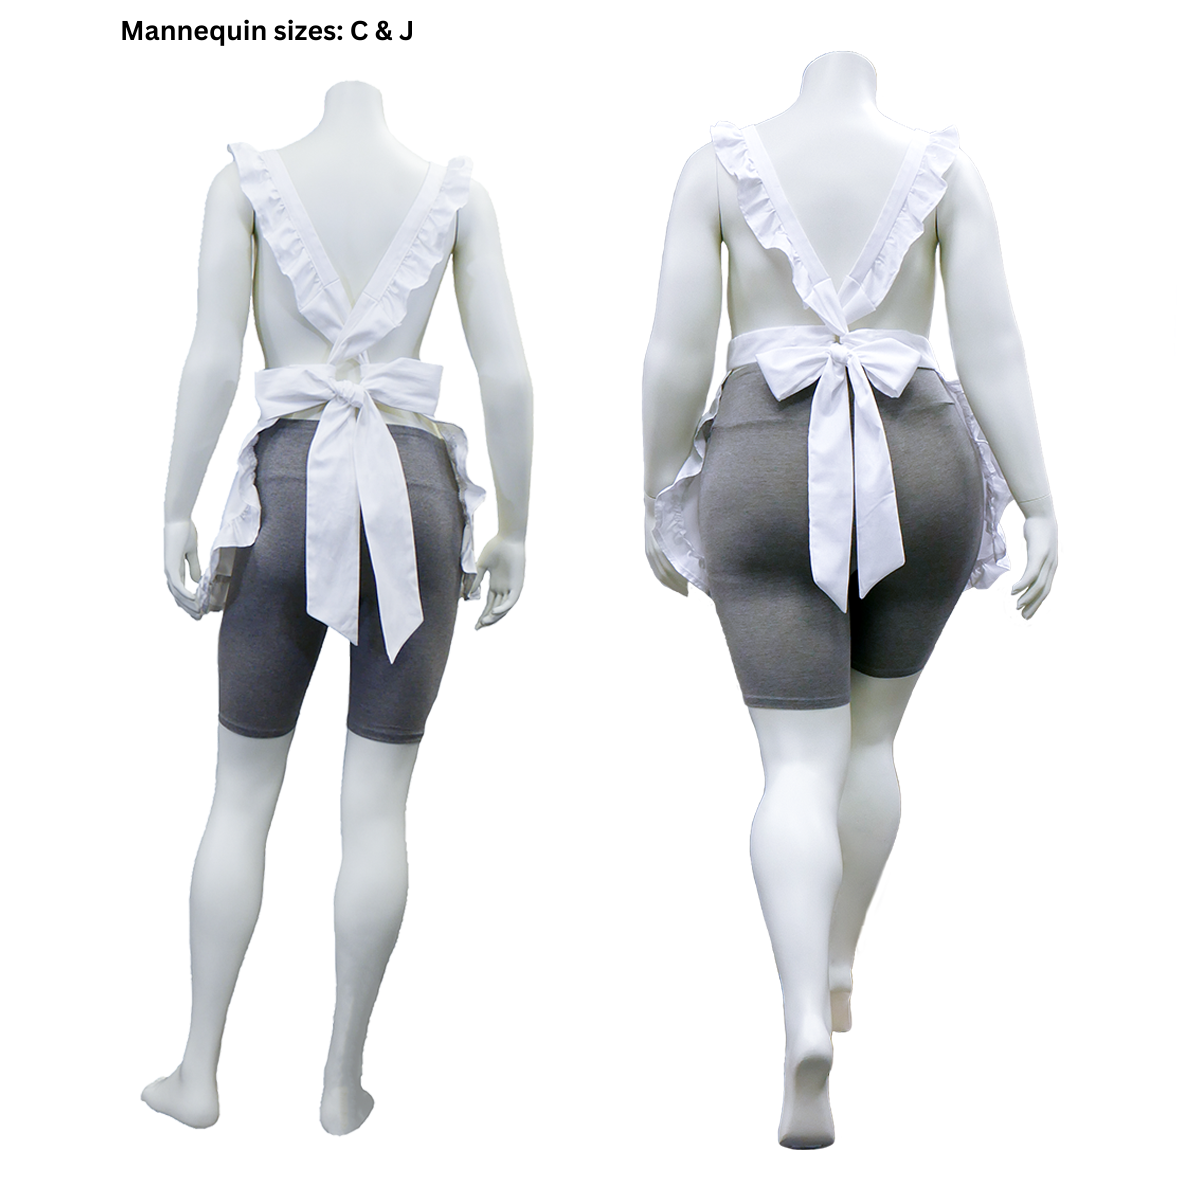 The reverse side of two completed FSCO Aprons (f) on female mannequins in sizes C and J, respectively. Both mannequins feature the criss-cross back and bow tie.